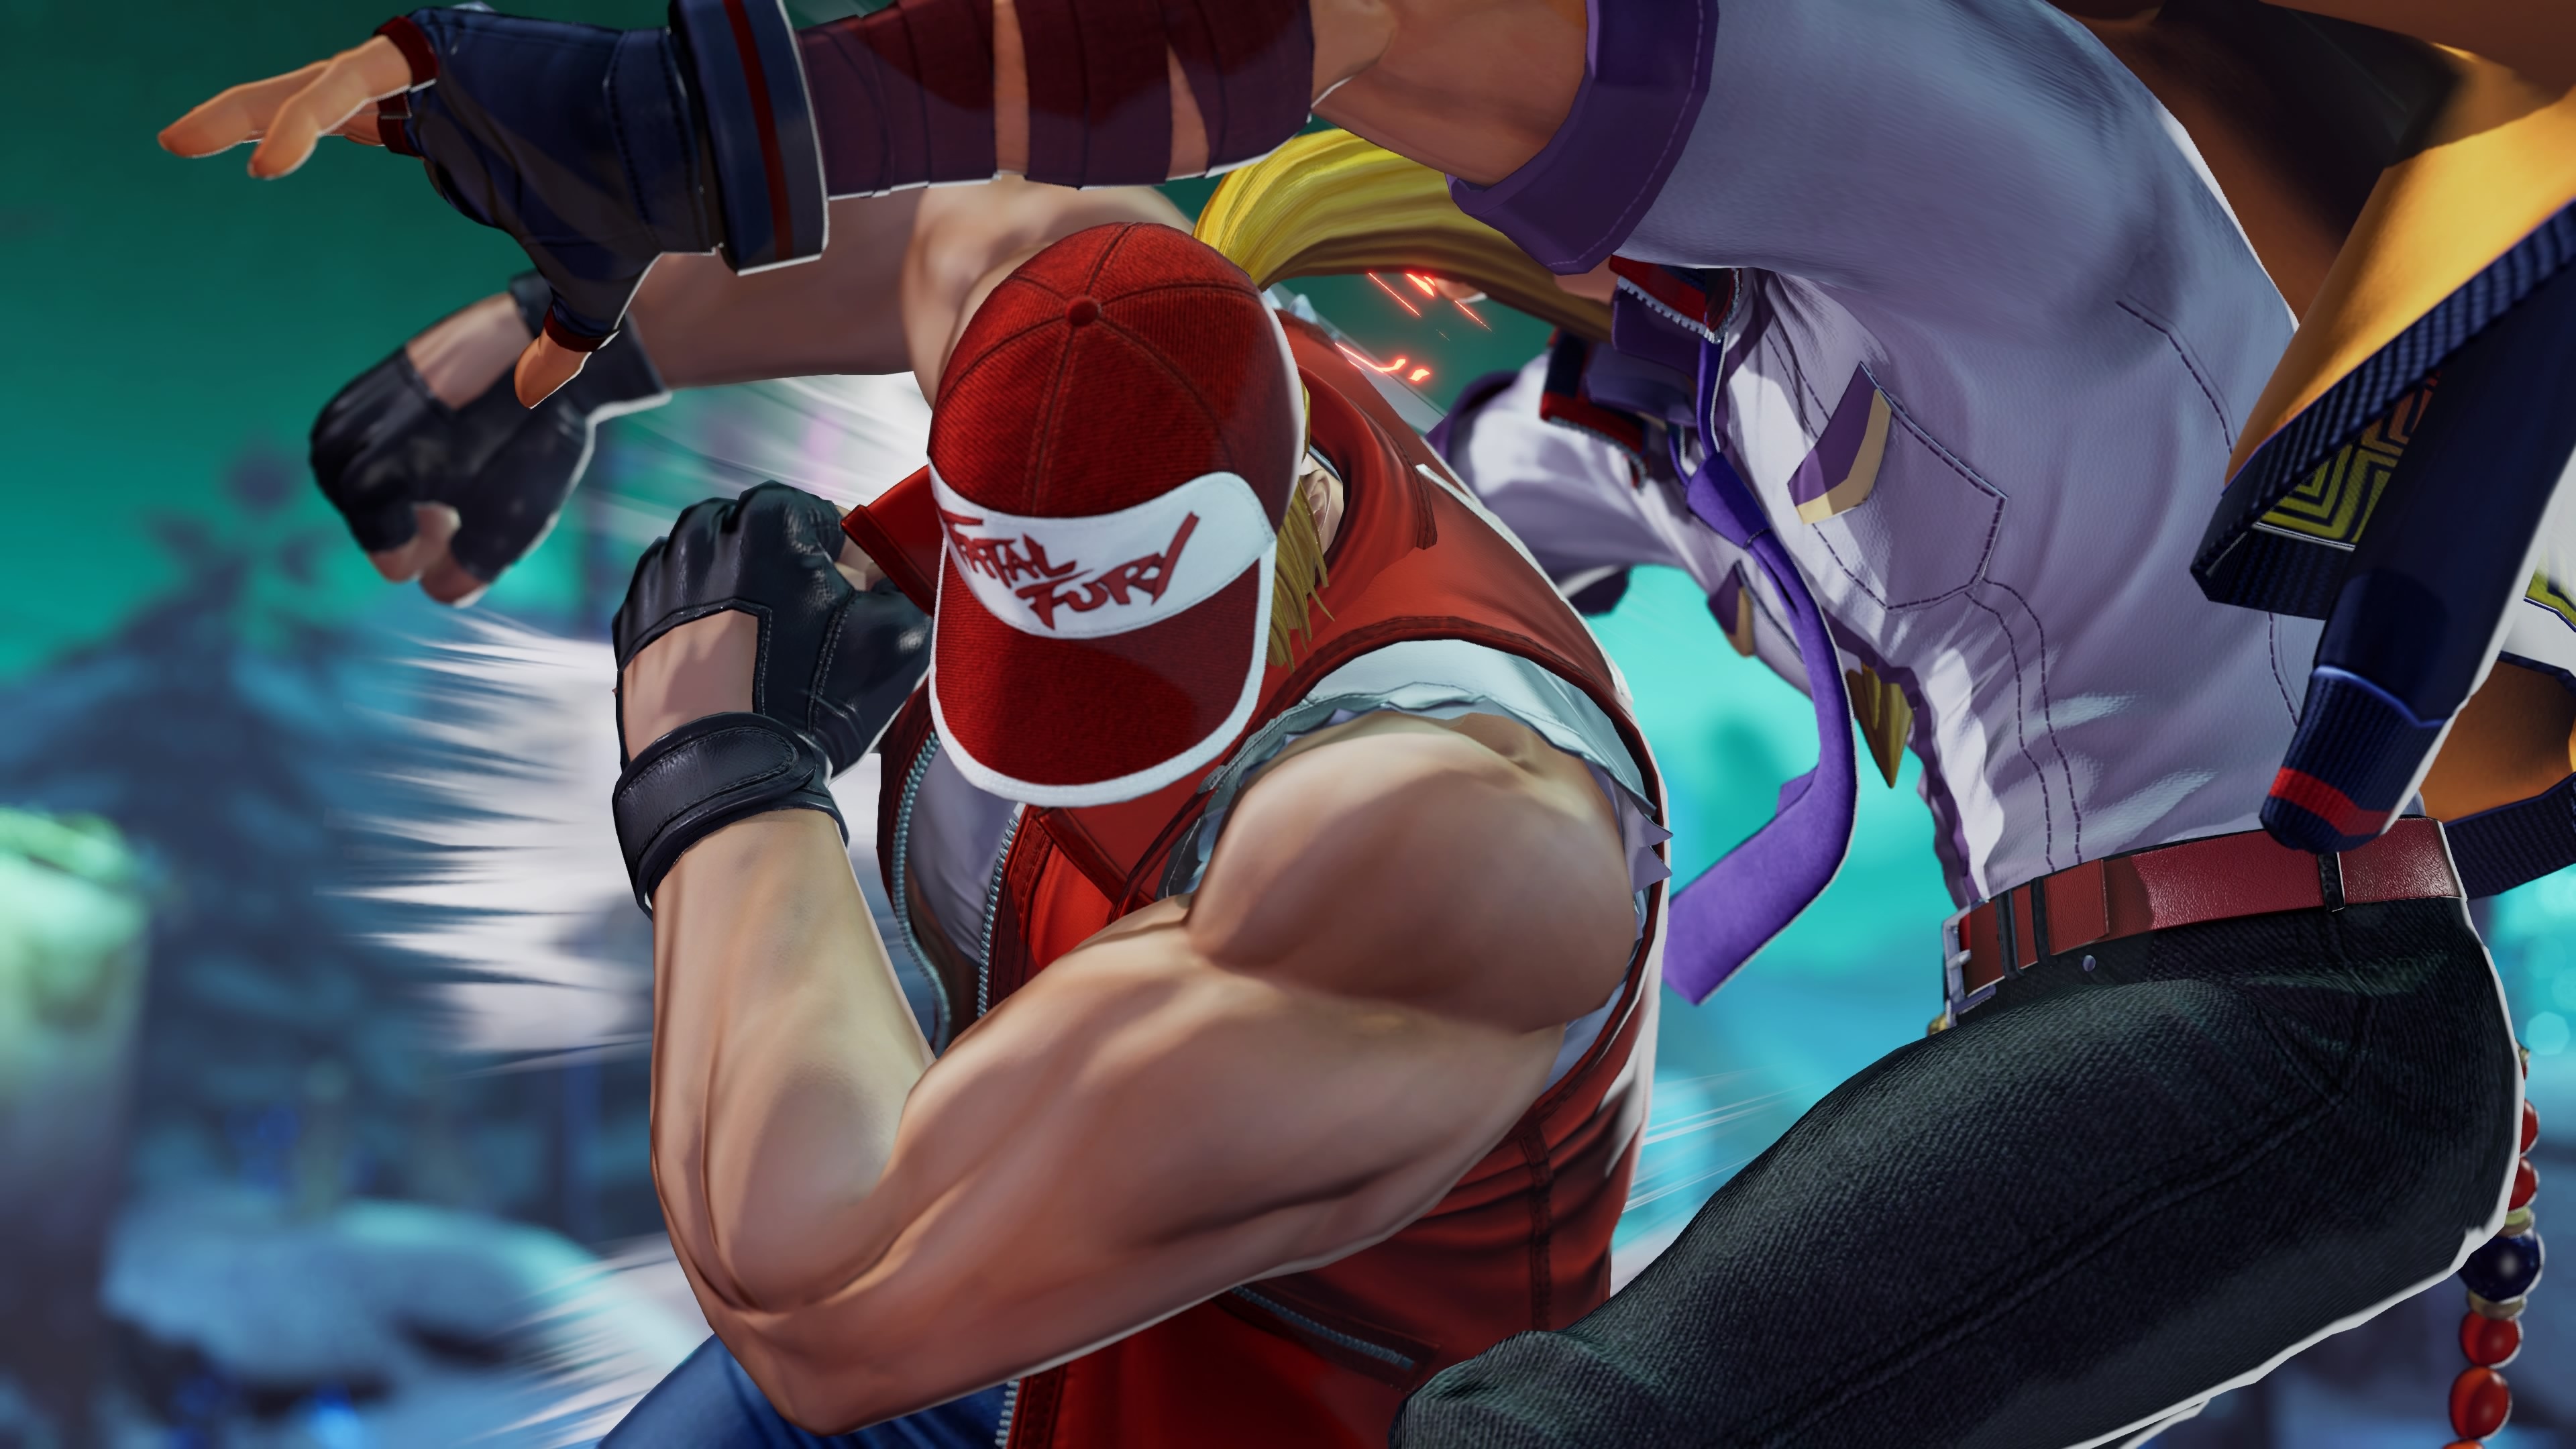 King of Fighters, xv, terry guide, terry bogard, 3840x2160 4K Desktop